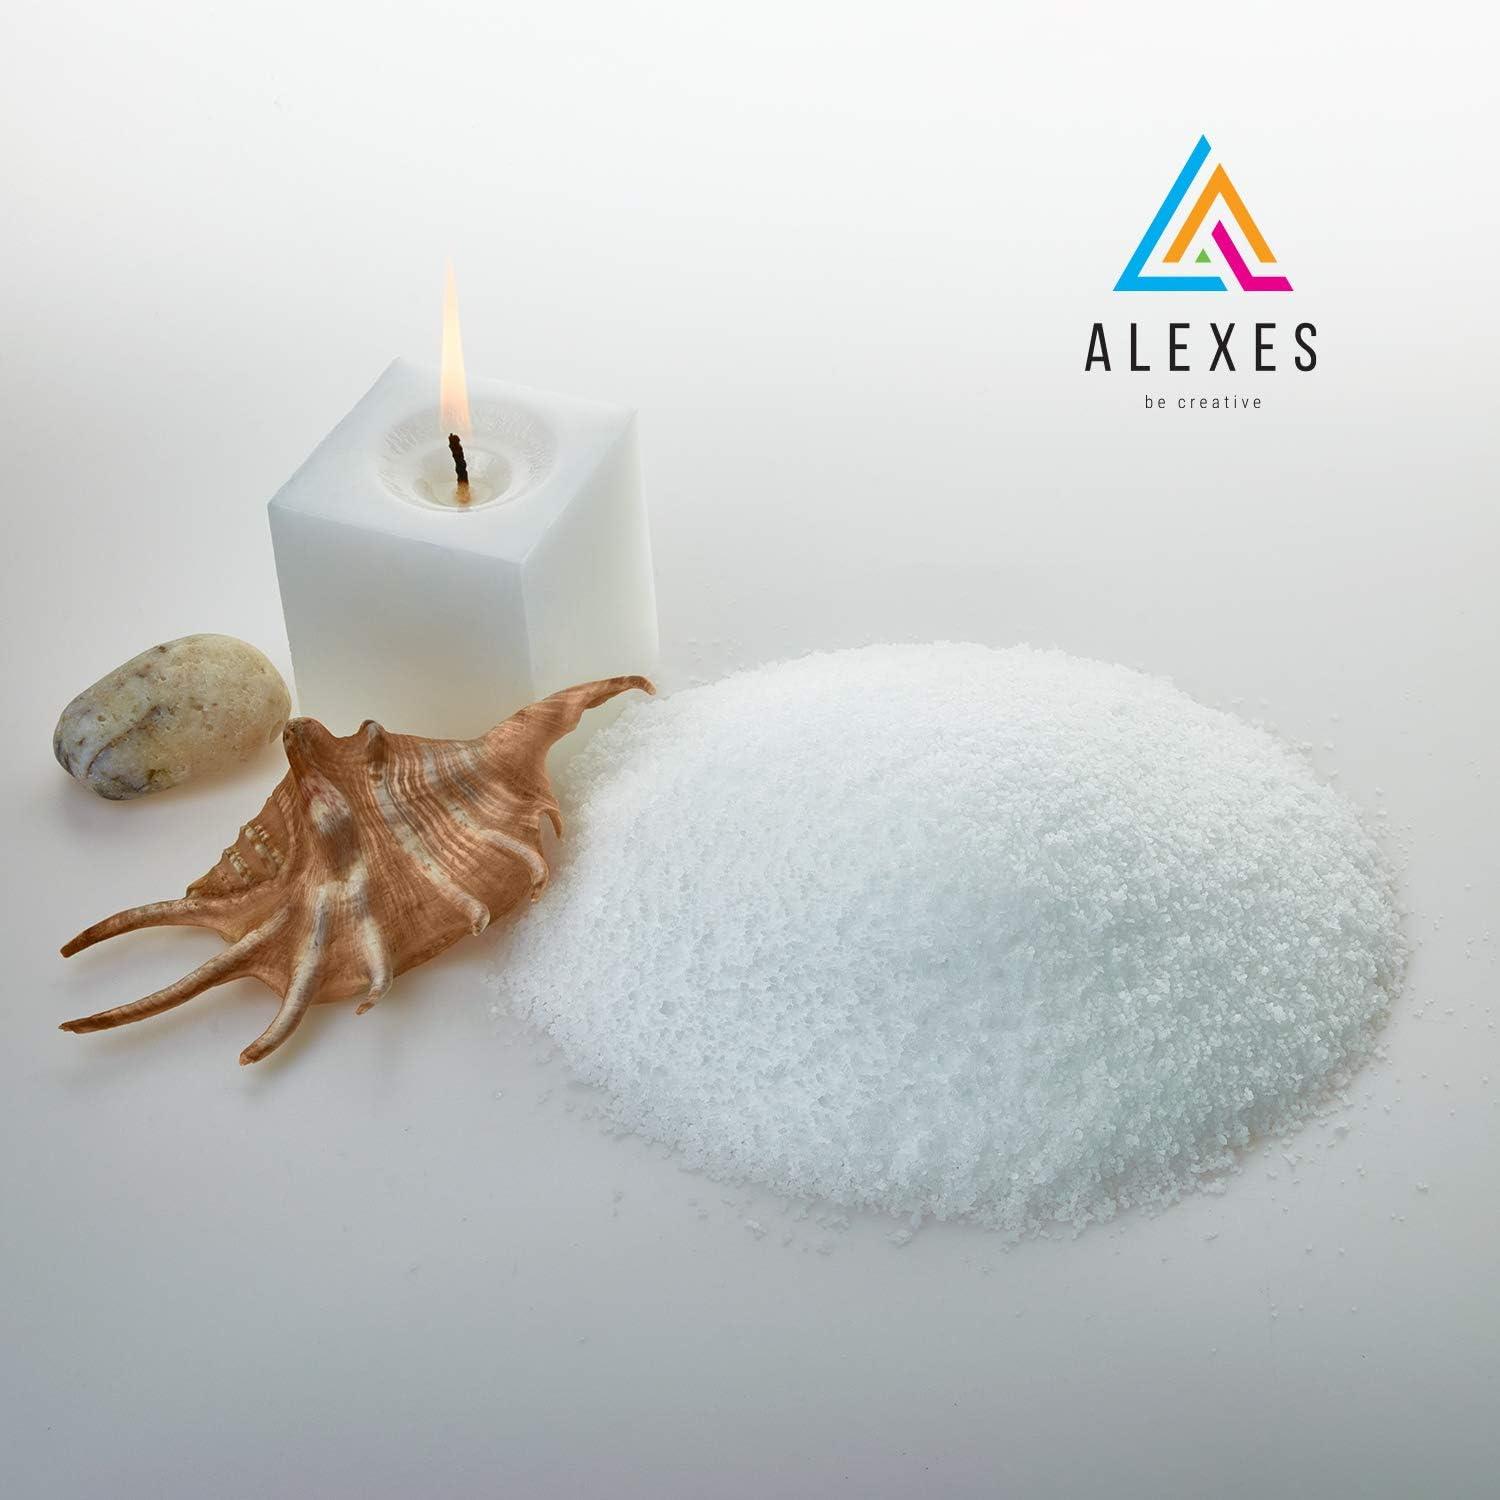 ALEXES Paraffin Wax for Candle Making - Unscented Candle Wax